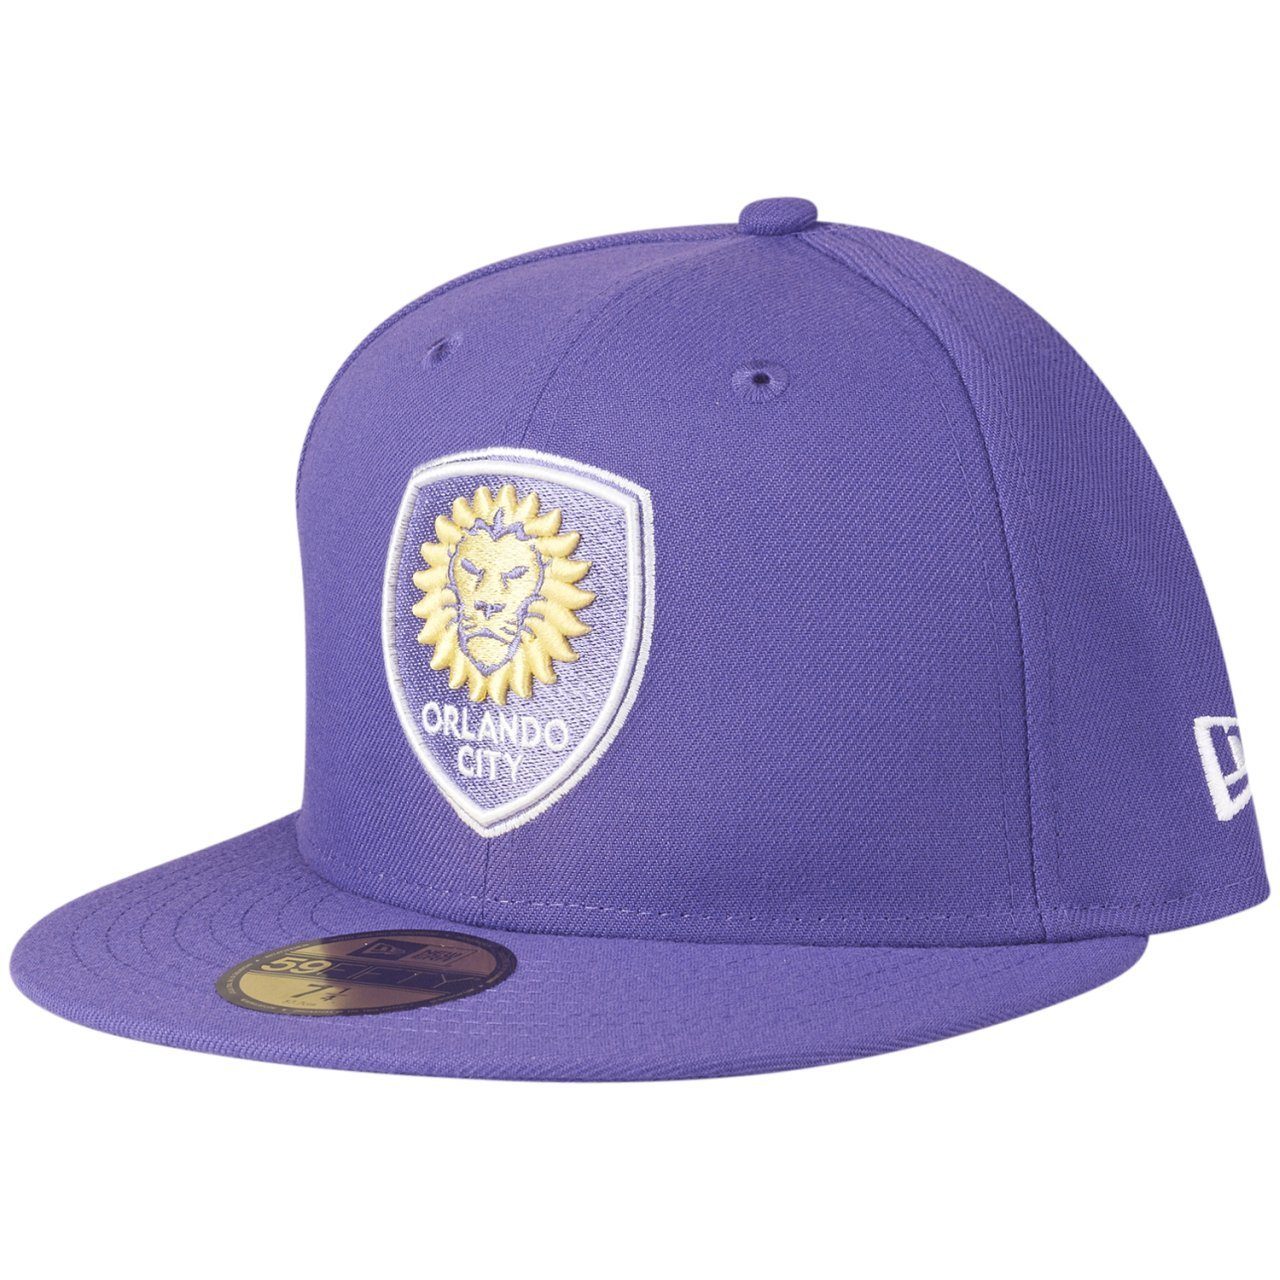 City Cap New MLS Fitted Orlando Era 59Fifty